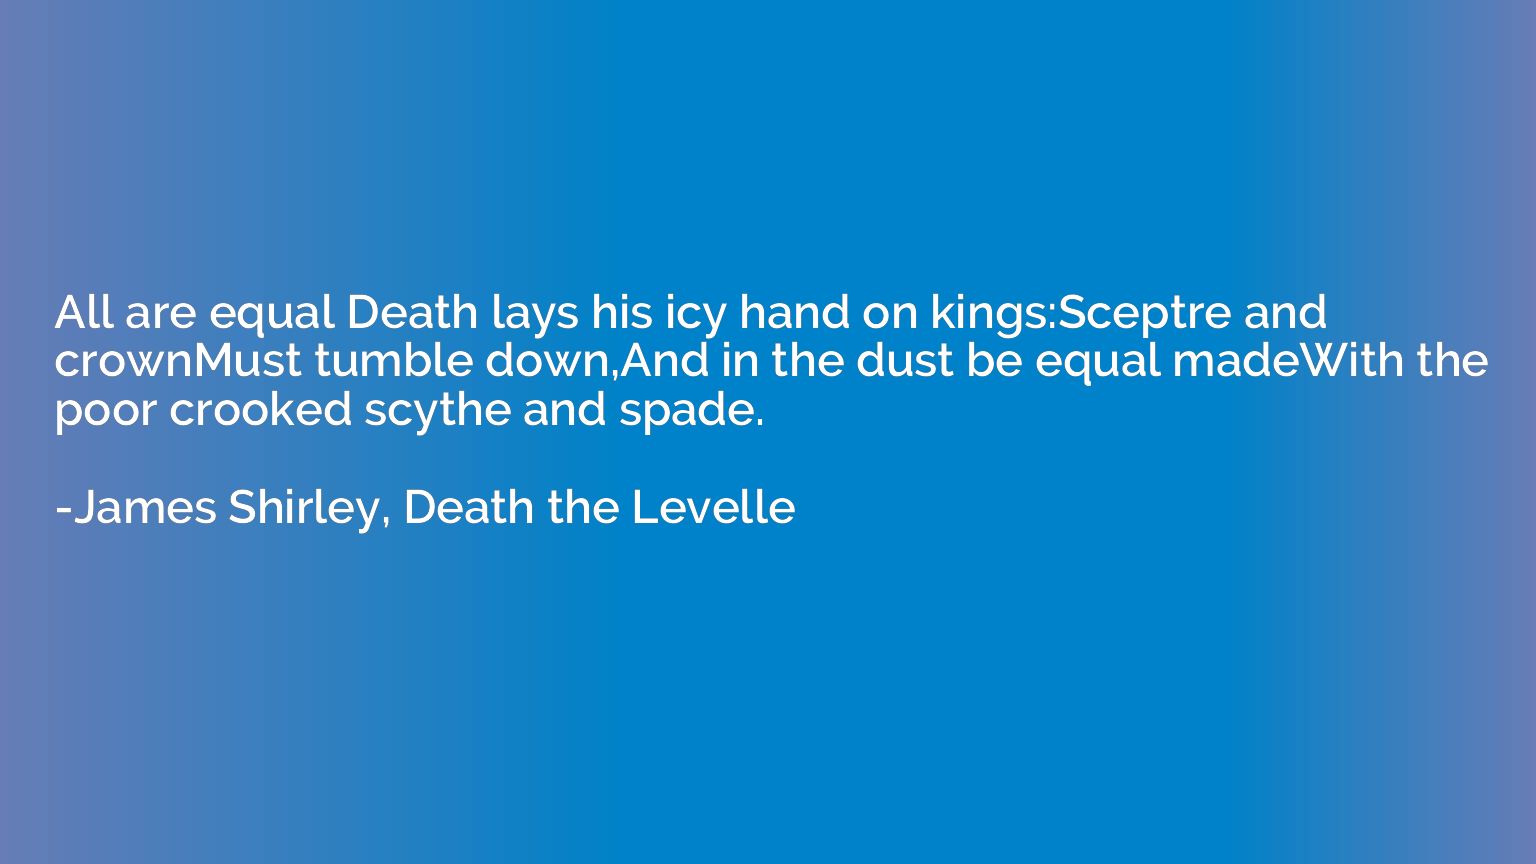 All are equal Death lays his icy hand on kings:Sceptre and c